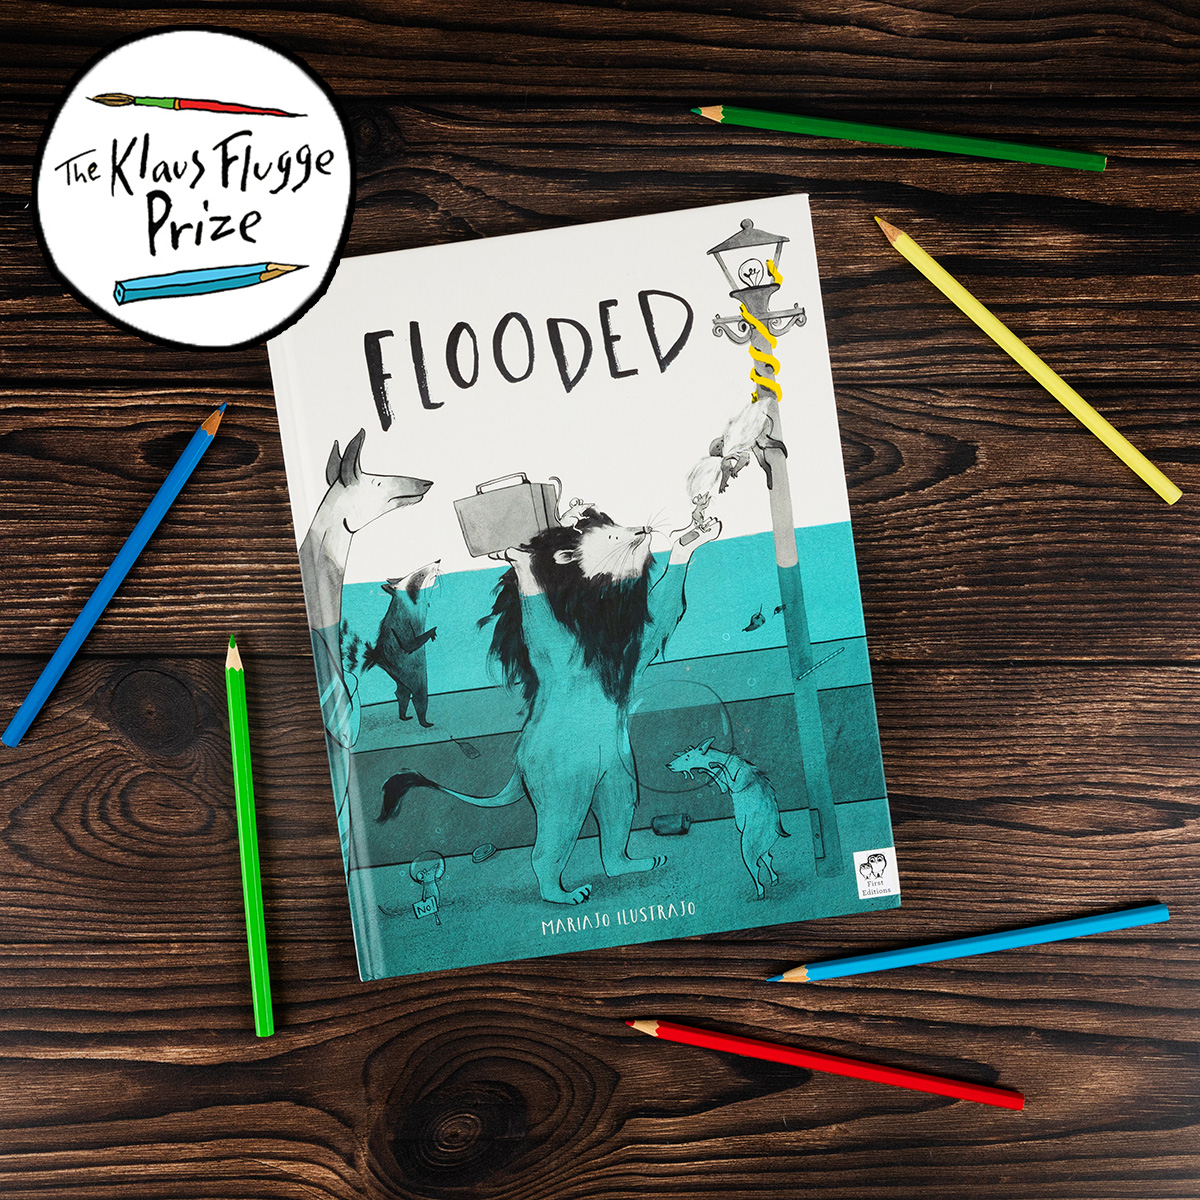 Congratulations to @Ilustrajo, winner of the 2023 #KlausFluggePrize with her marvellous picture book, Flooded! Bursting with spirit & full of beautifully, captivating illustrations this brilliant tale comes with an important message & is available here: bit.ly/44TNarF